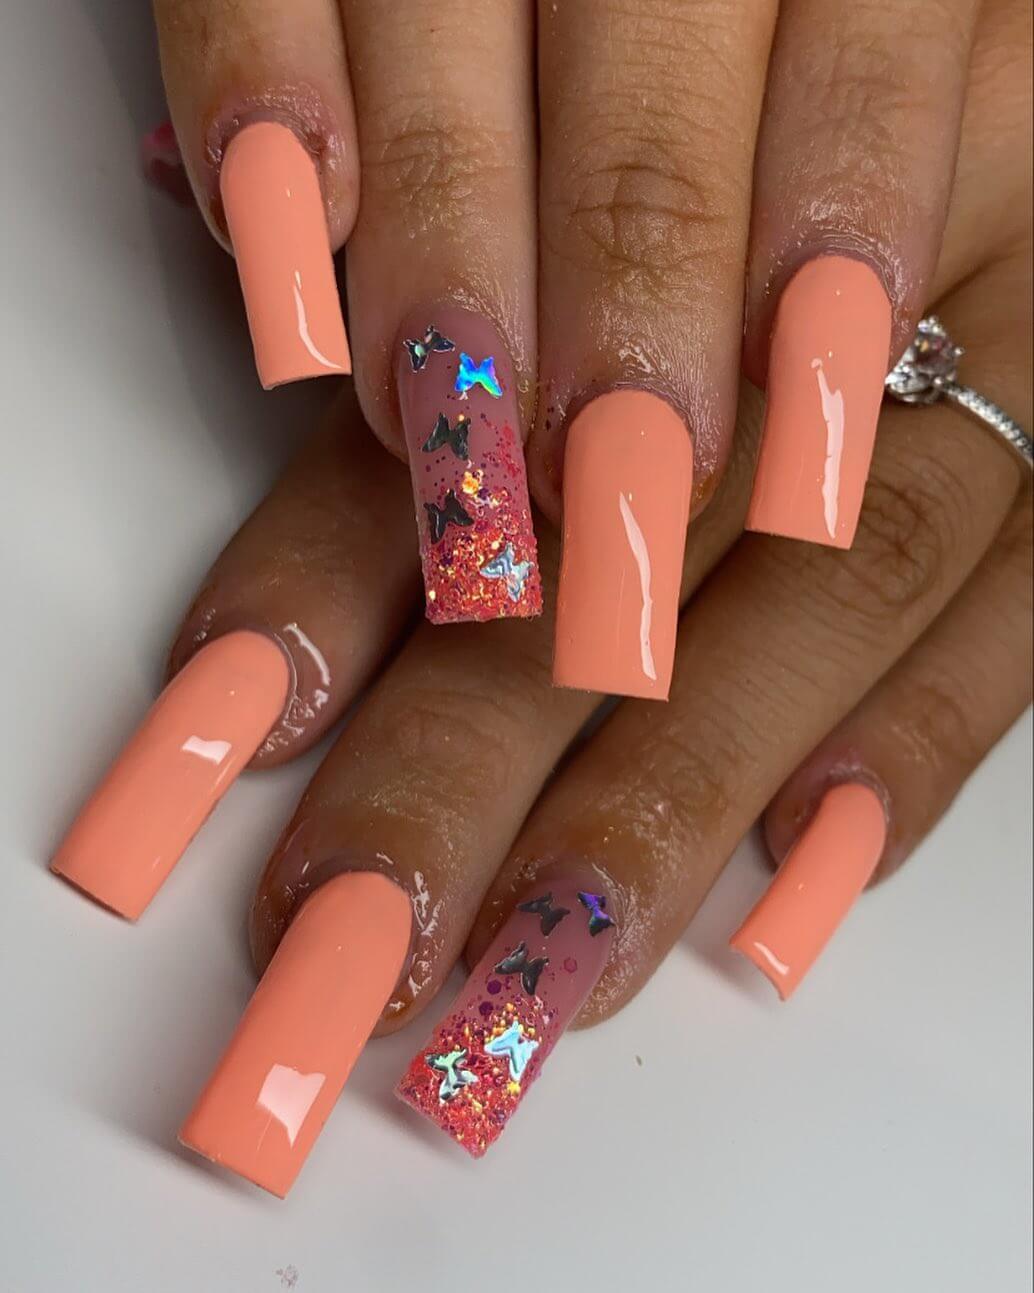 Sparkly Peach Nail Art Design with Butterflies